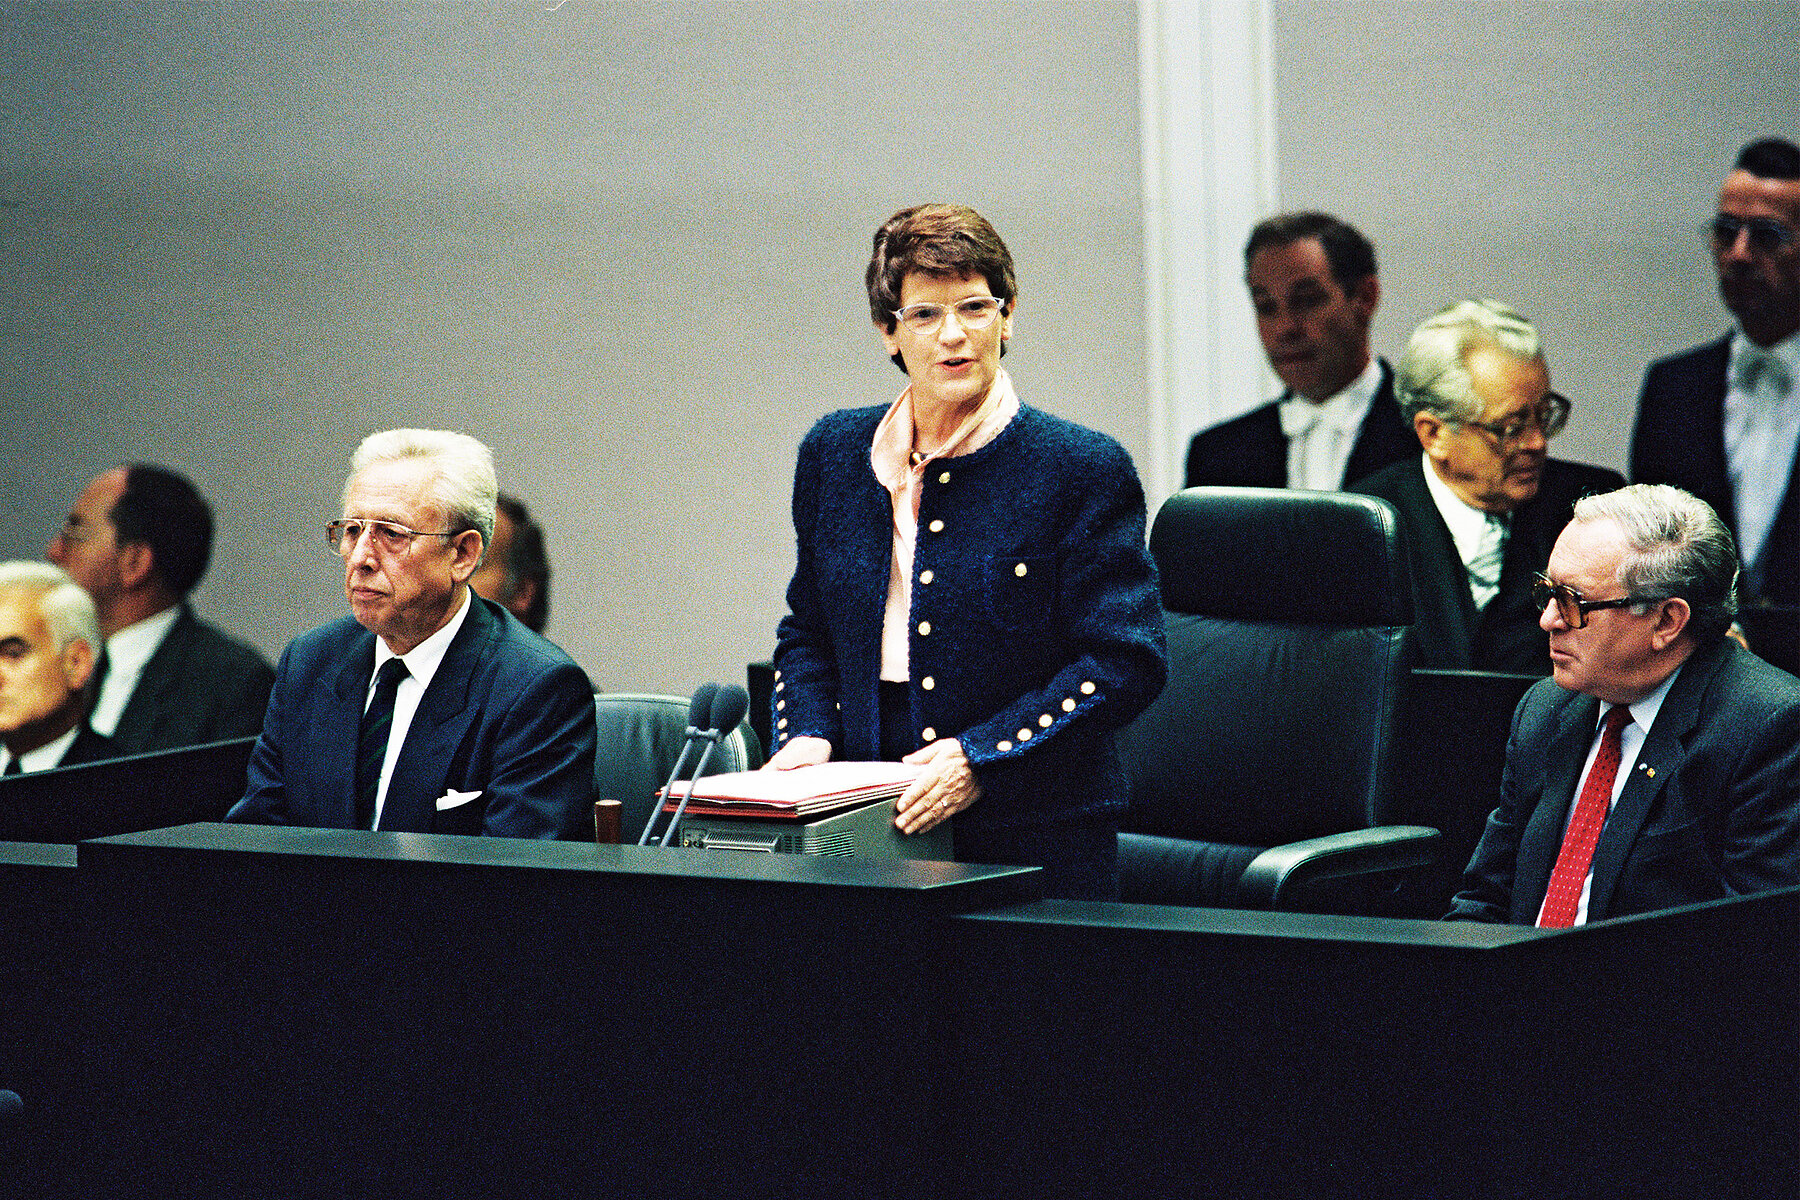 Rita Süssmuth stands at a podium and speaks while surrounded by seated male politicians.